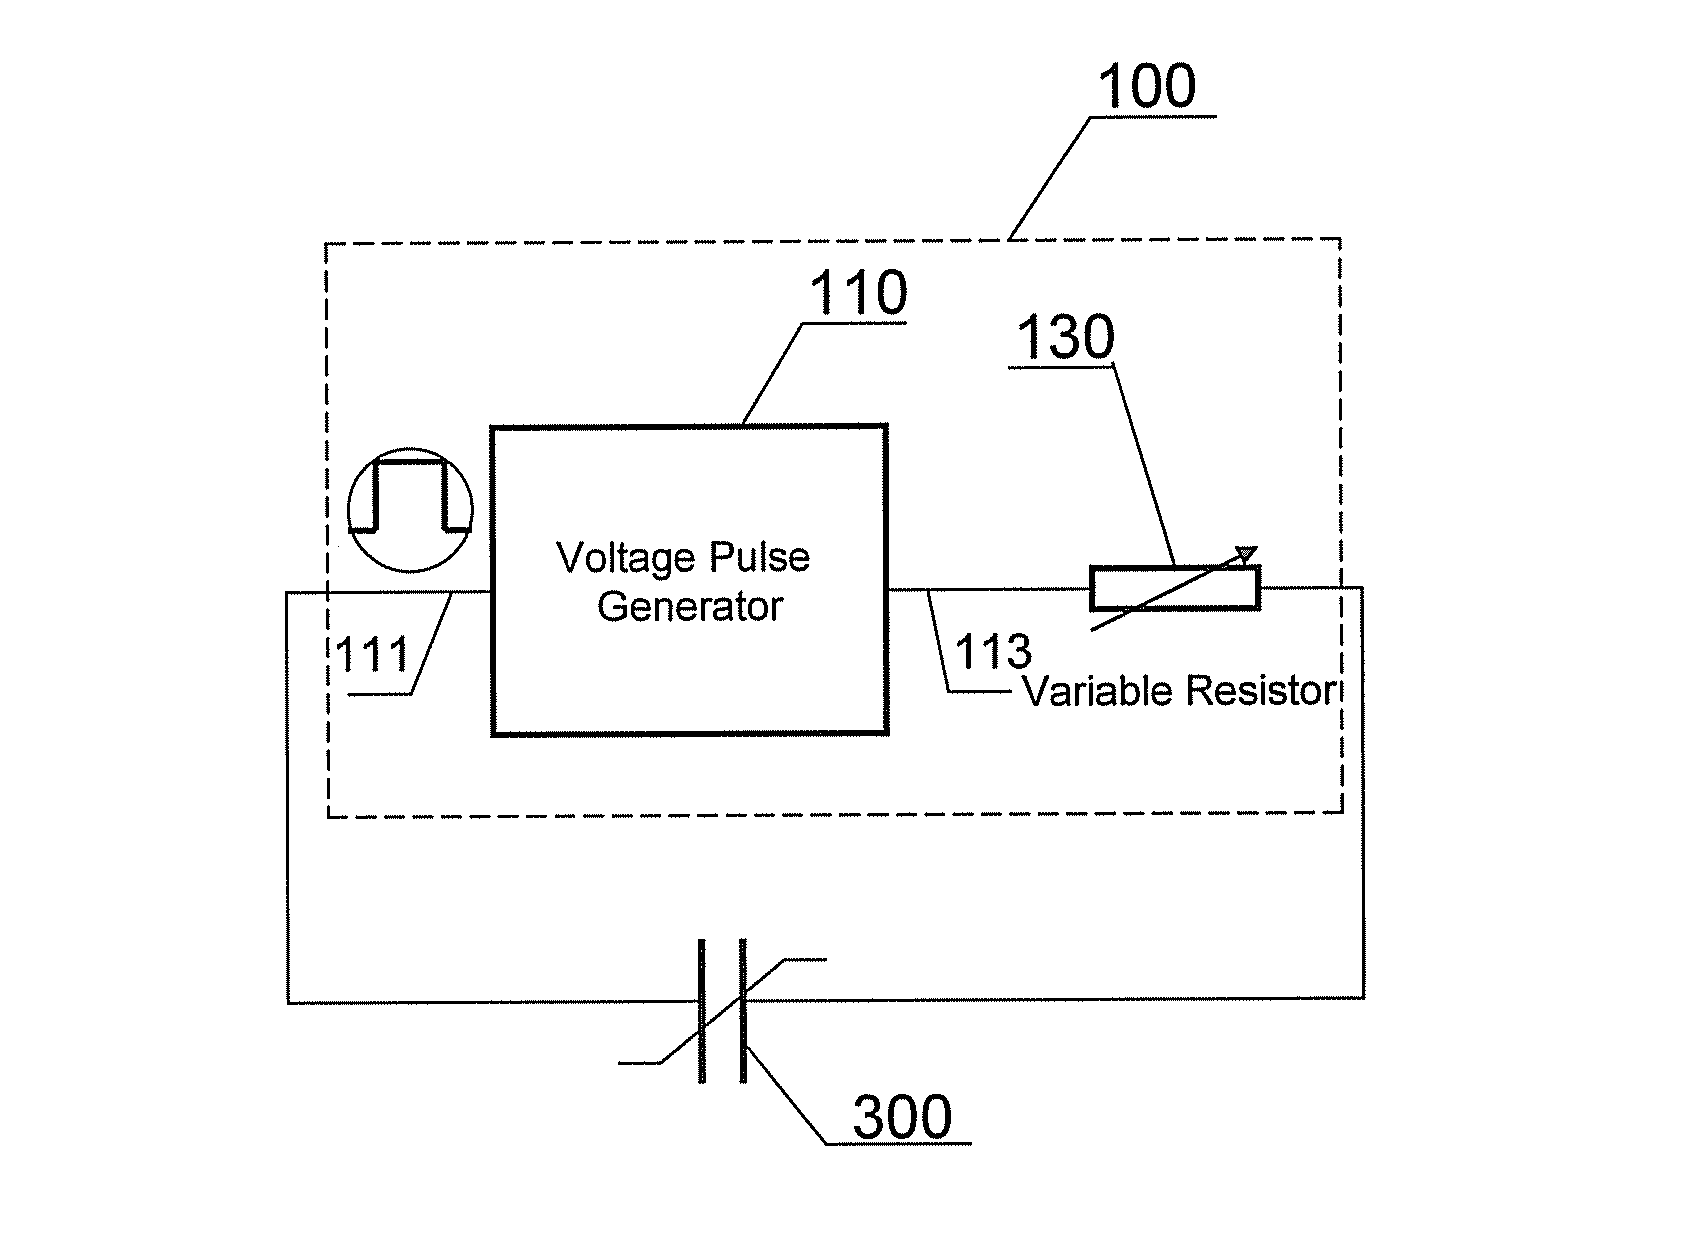 Ferroelectric analyzing device and method for adjusting ferroelectric domain switching speed